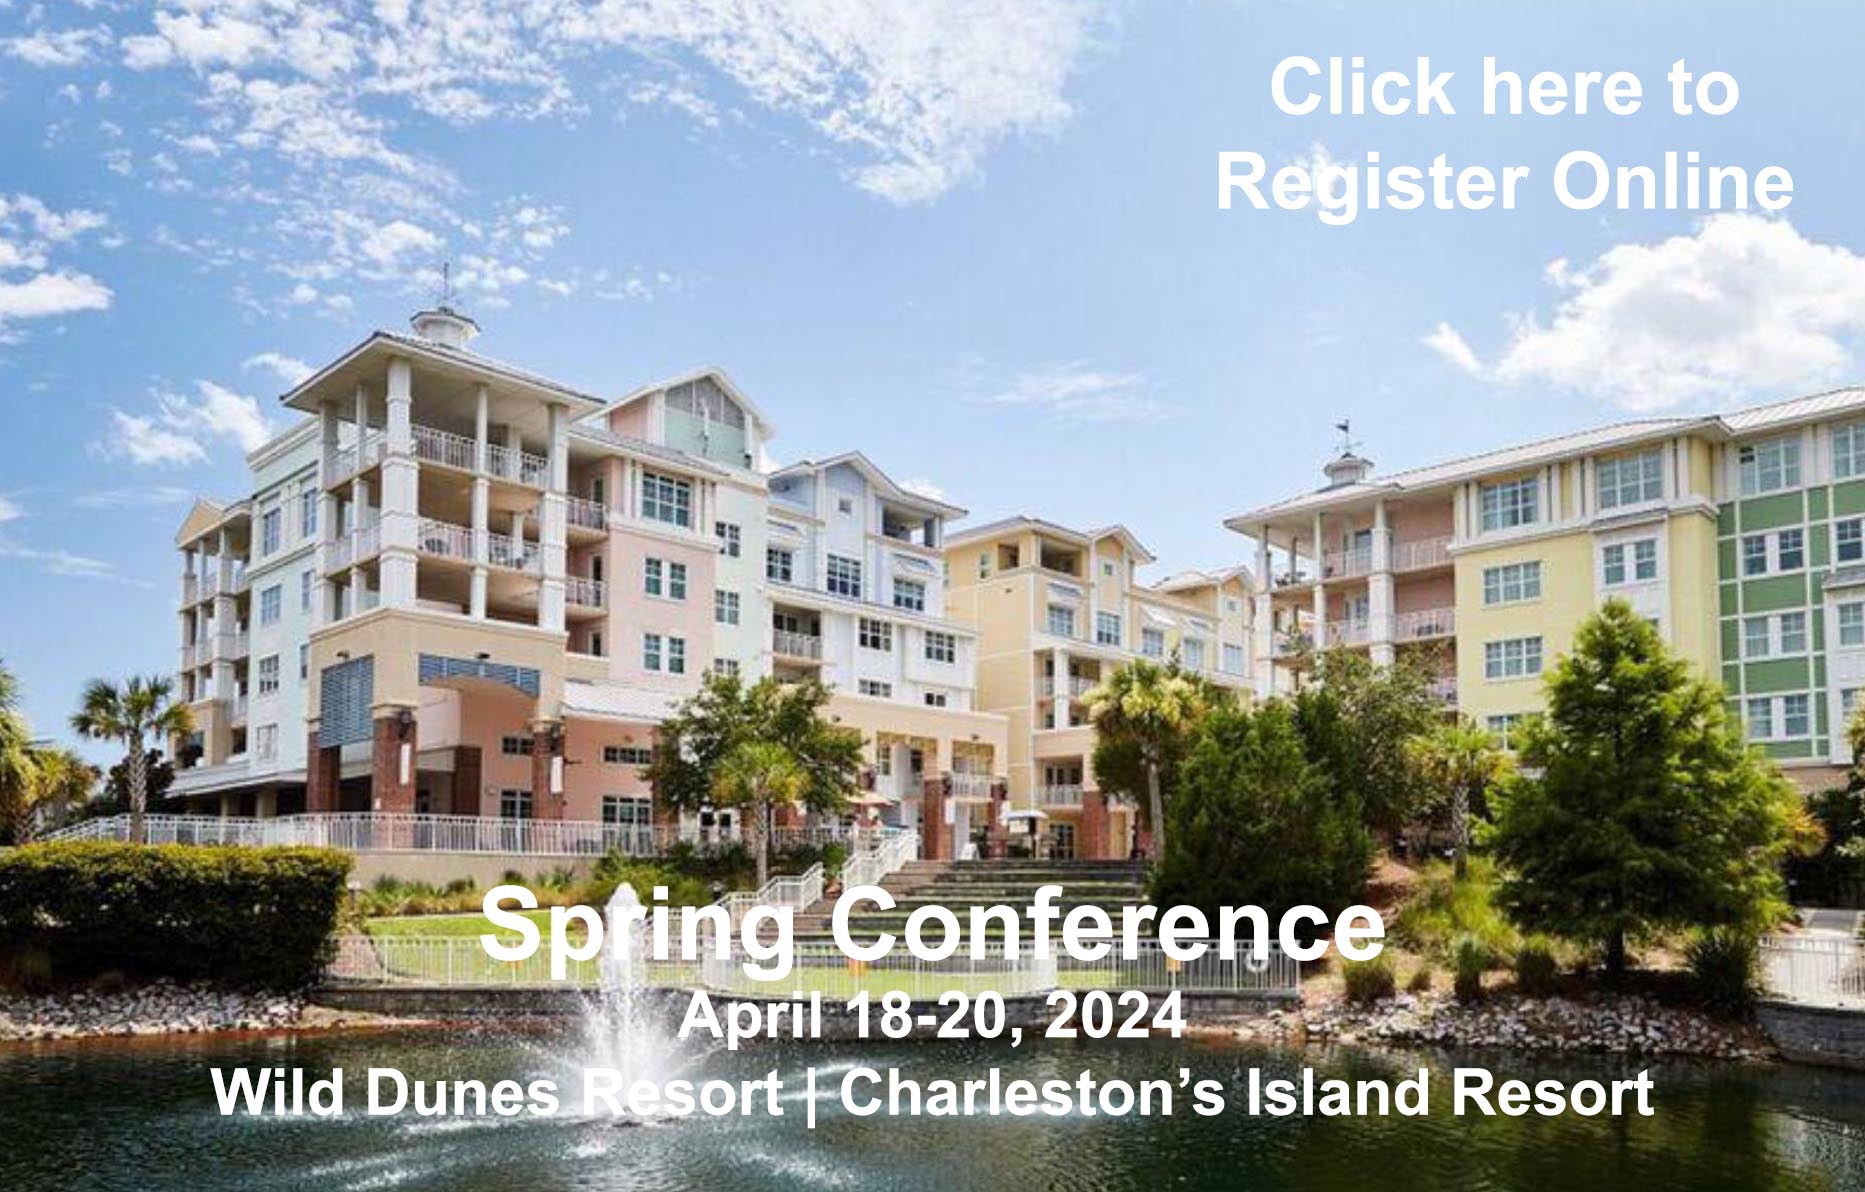 NCUCA’s Spring 2002 Annual Conference